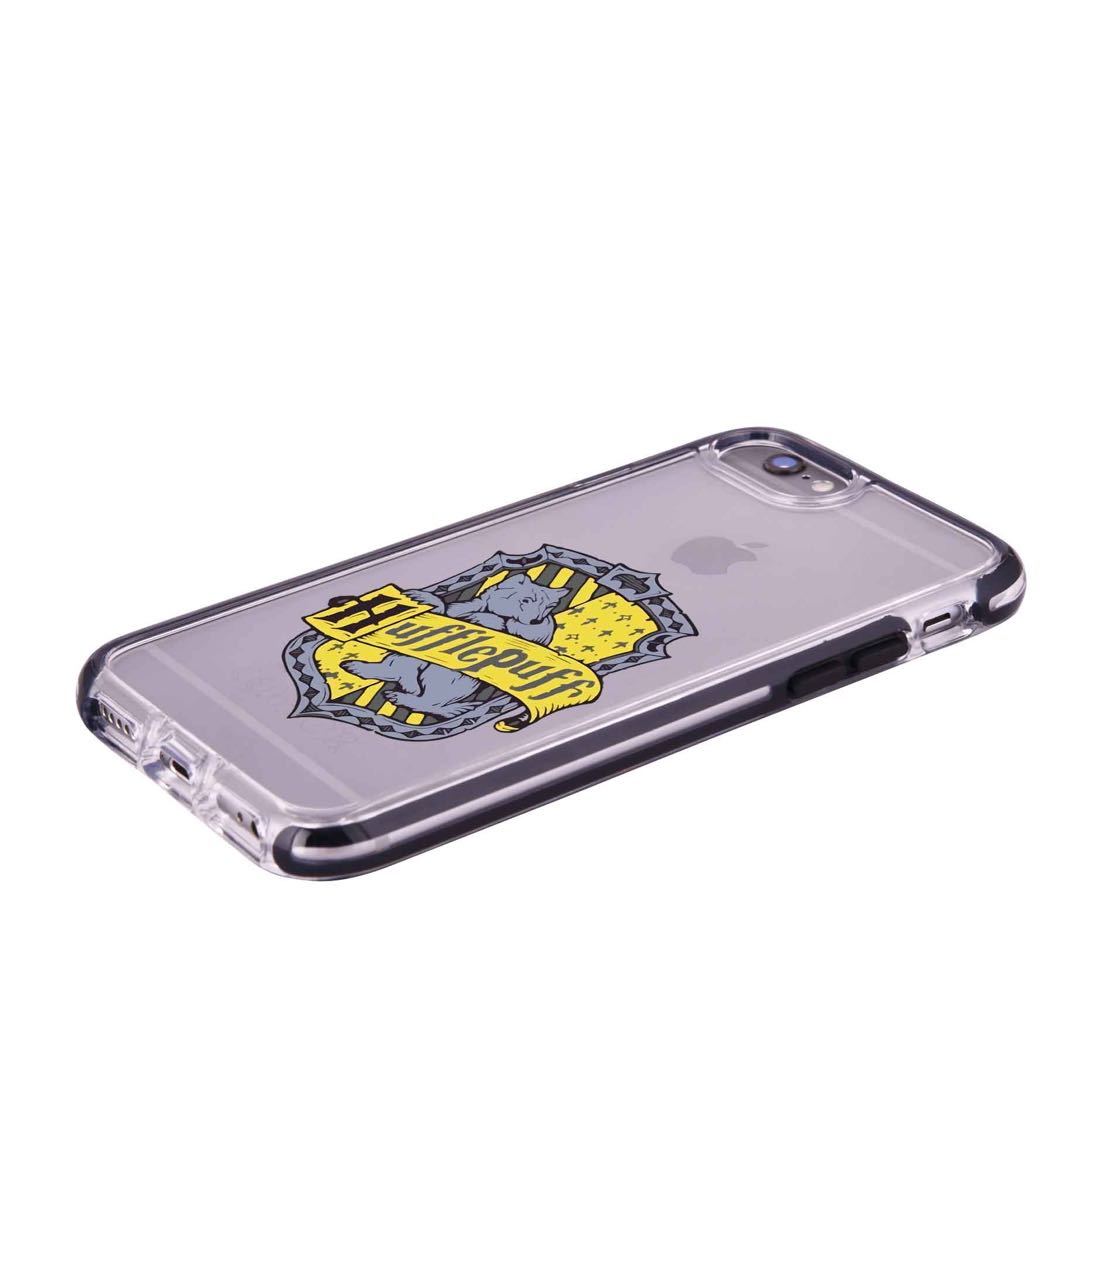 Crest Hufflepuff - Extreme Phone Case for iPhone 6S